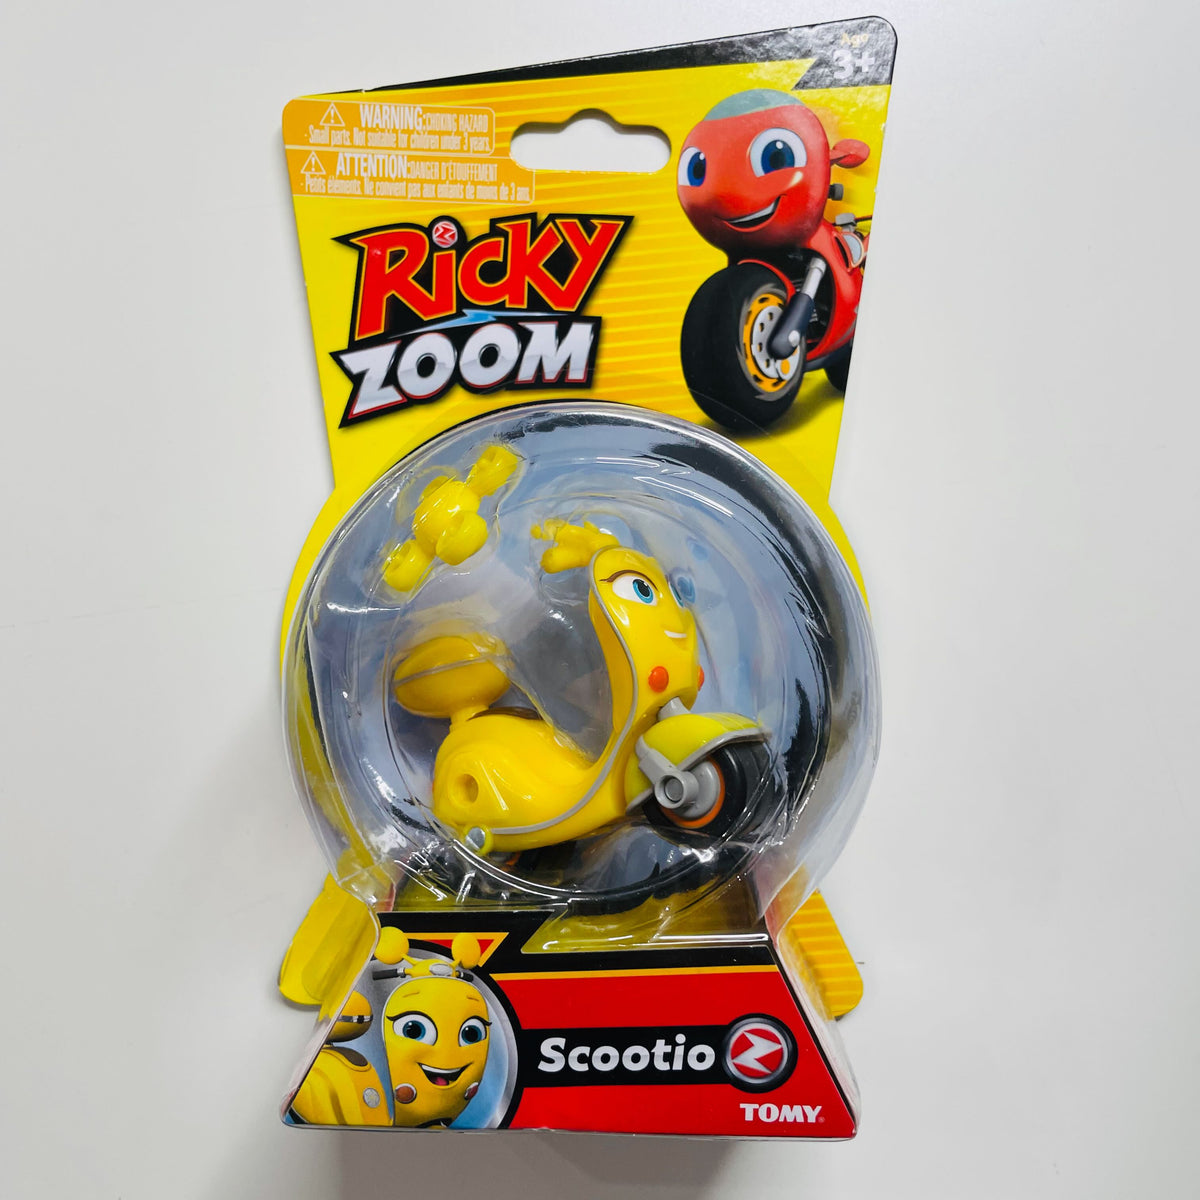 Ricky Zoom: Scootio Whizzbang Toy Motorcycle - 3 – Yummy Boutique